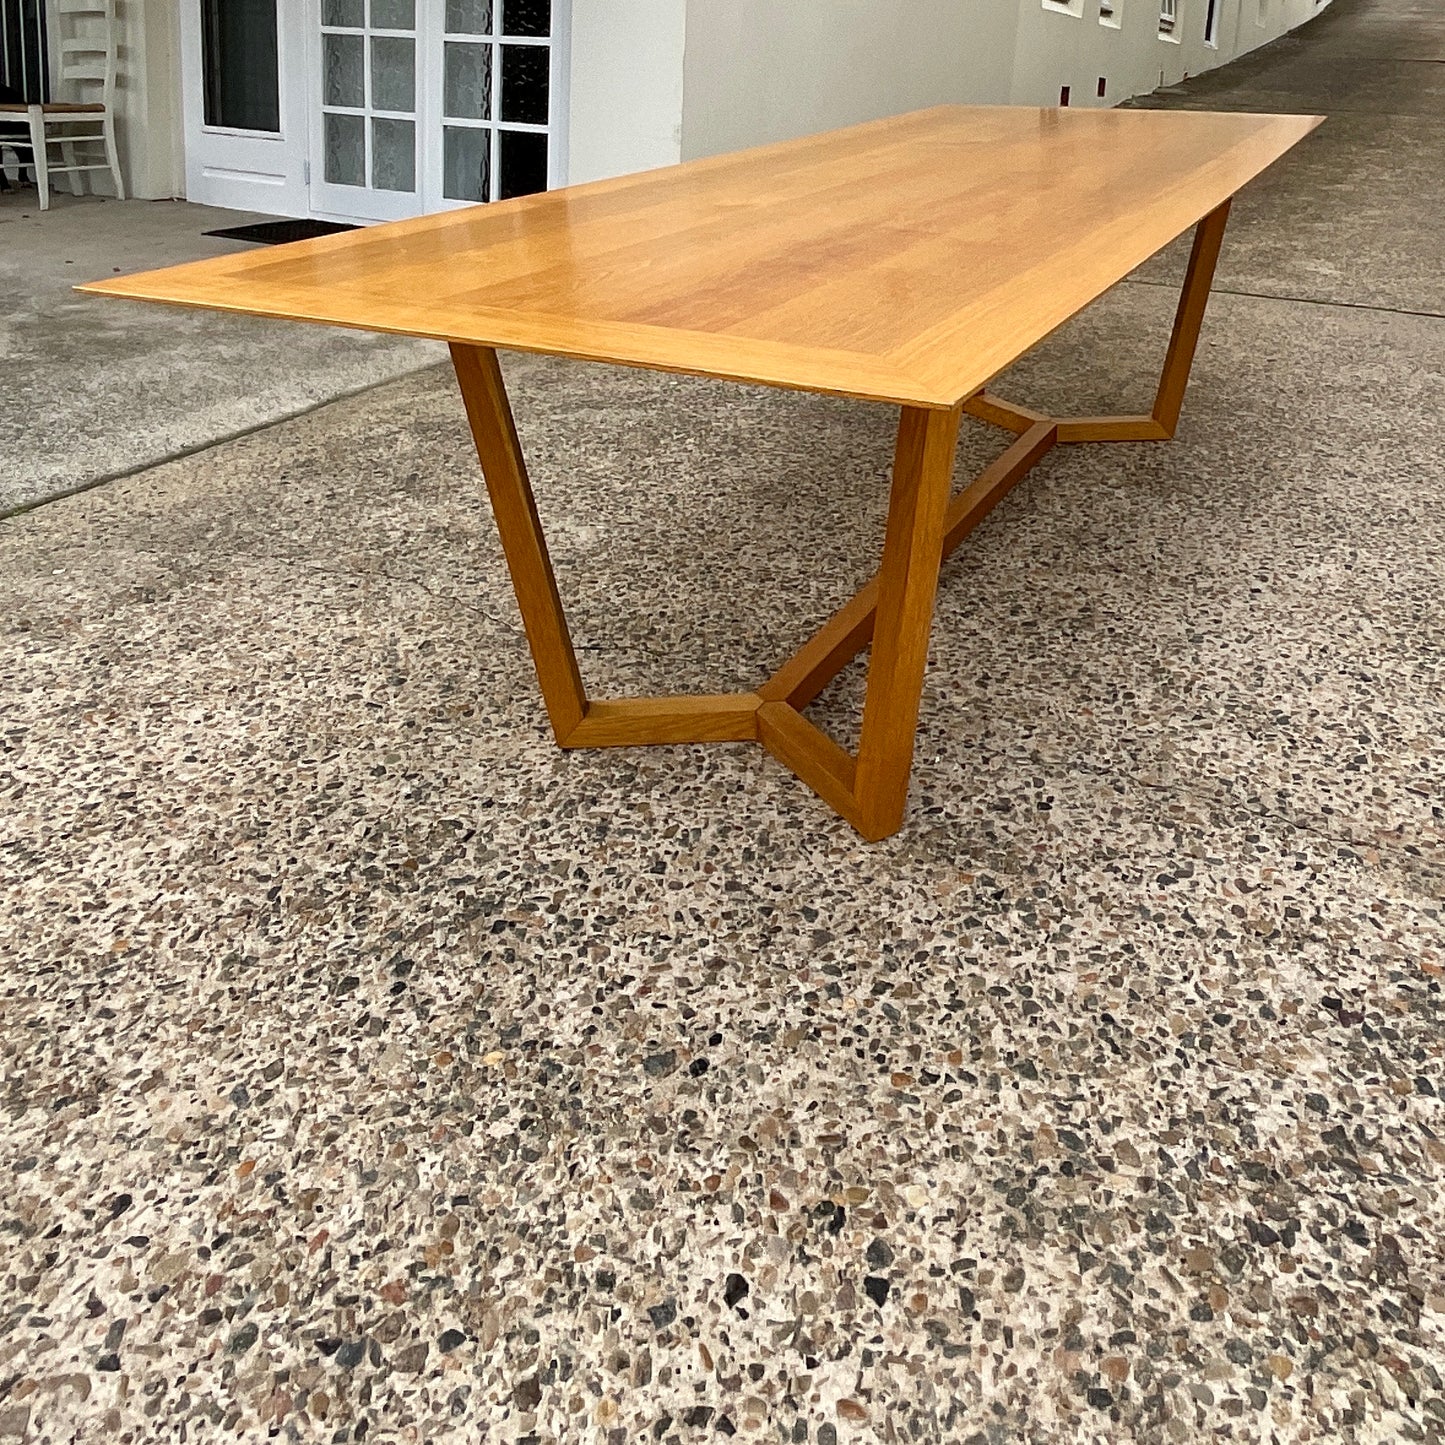 Atticus Dining Table by Andrew Lowe for Lowe Furniture through Hub